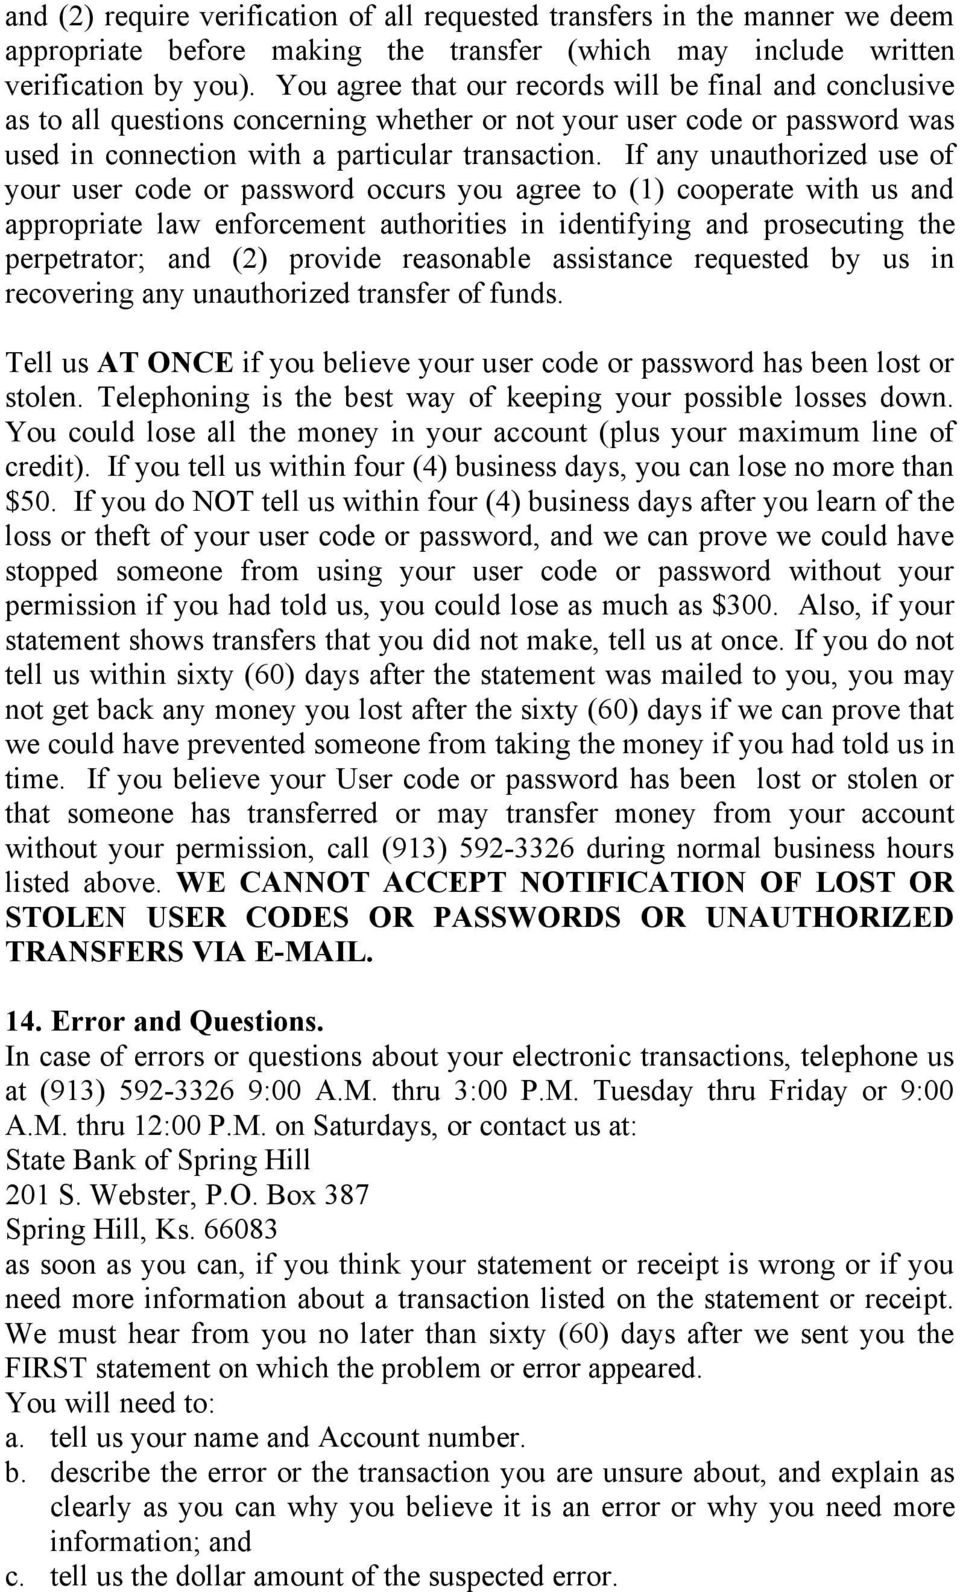 If any unauthorized use of your user code or password occurs you agree to (1) cooperate with us and appropriate law enforcement authorities in identifying and prosecuting the perpetrator; and (2)